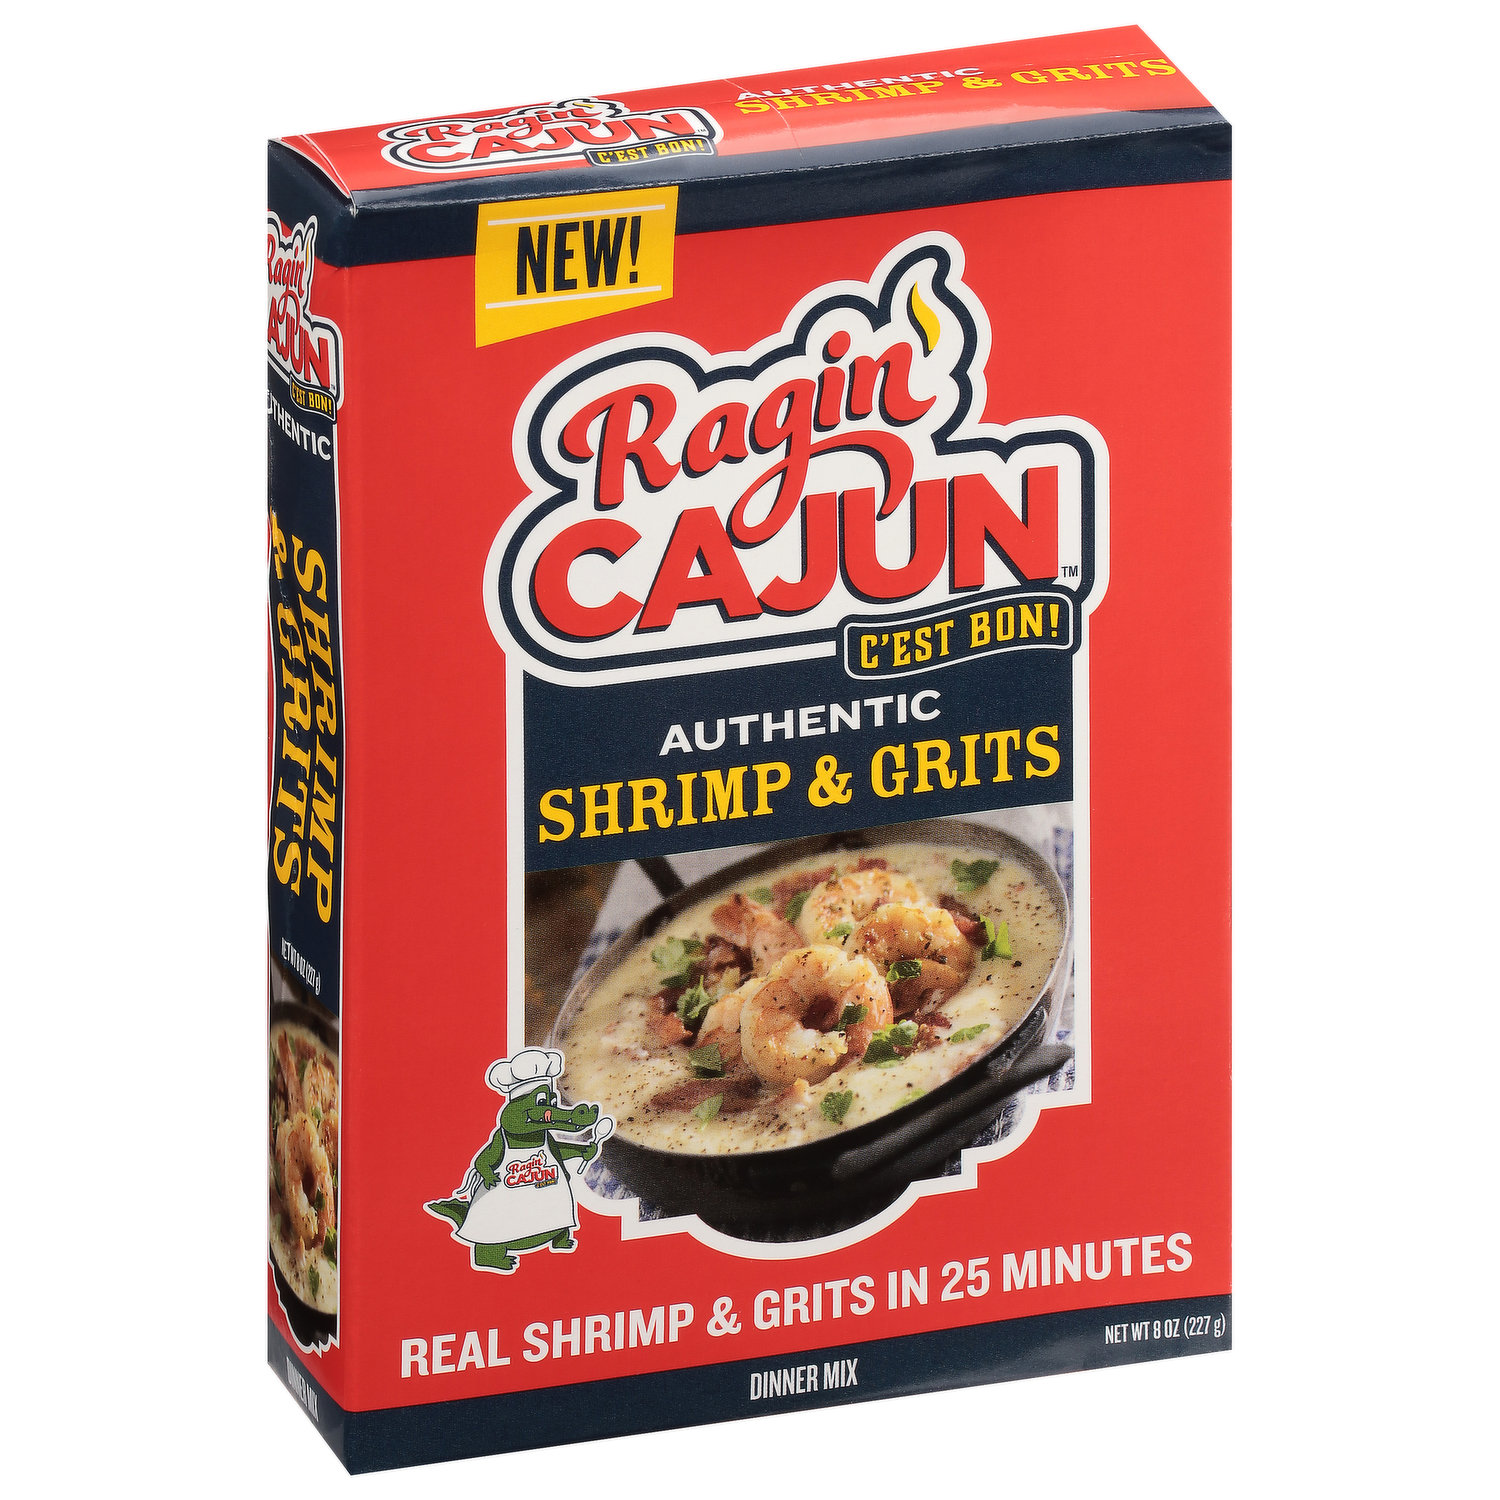 The Cajun Spoon: Cajun Food Products, Recipes, and Quick Dinner Ideas